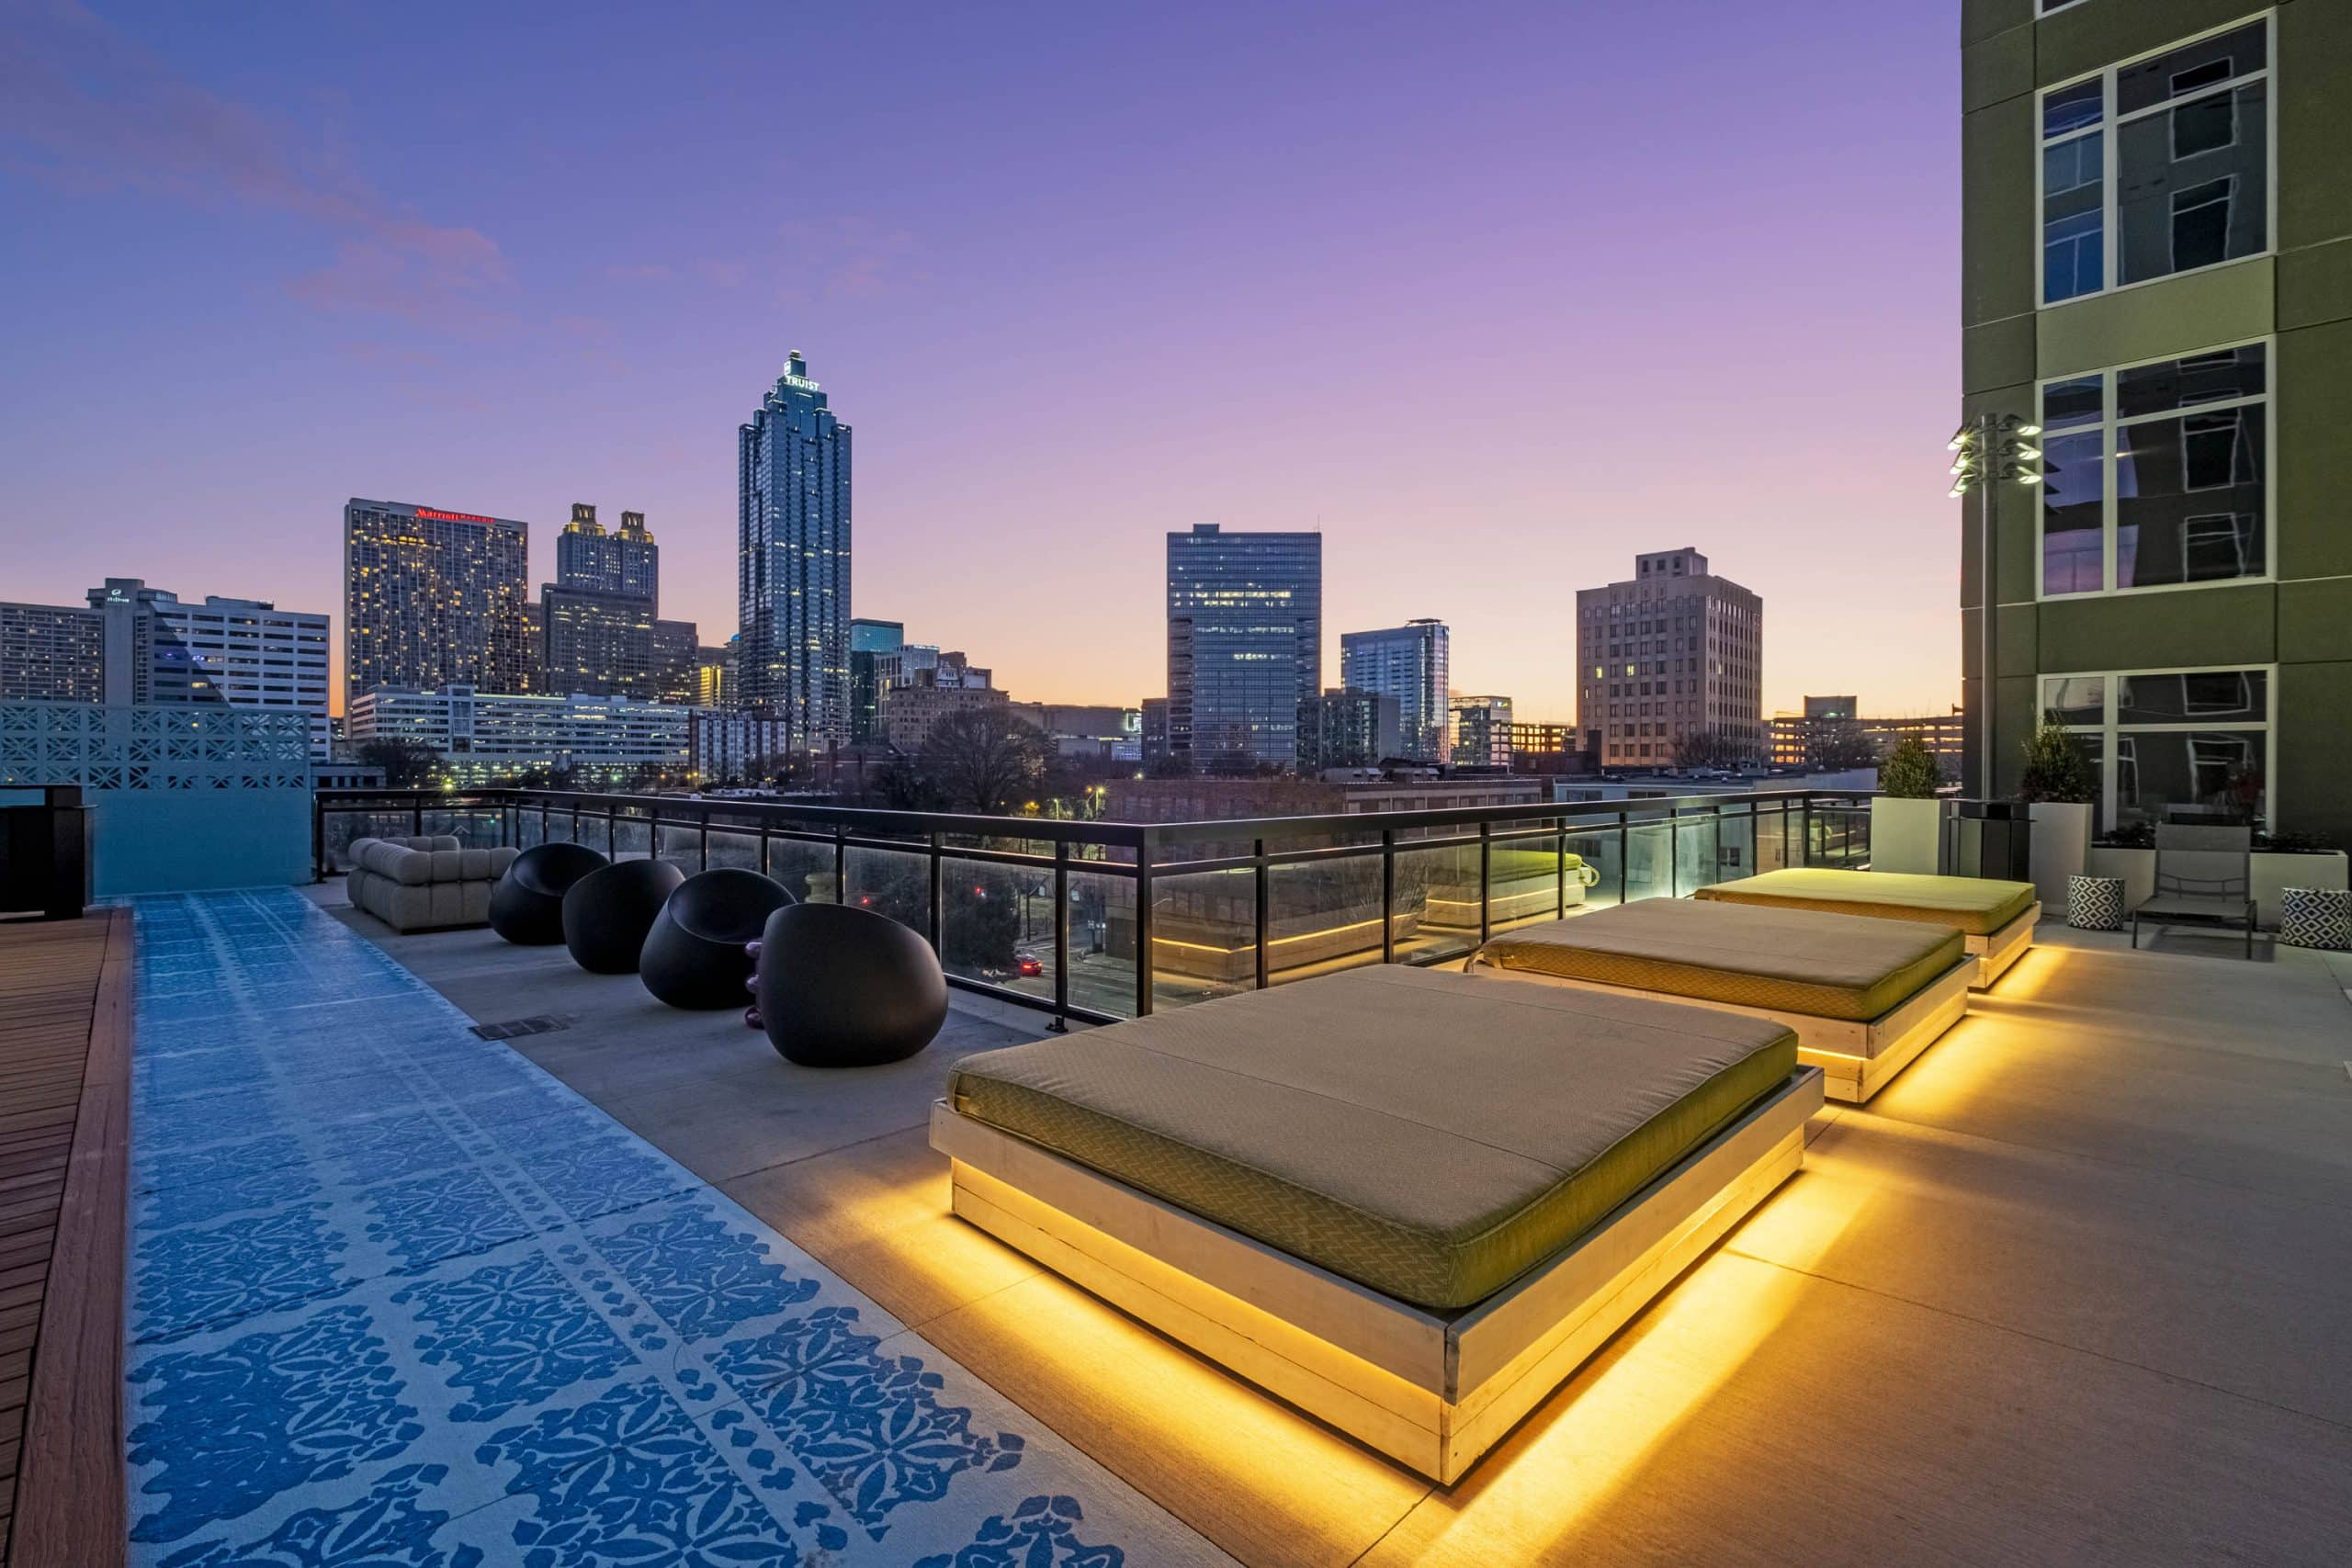 Furnished courtyard at dusk with skyline